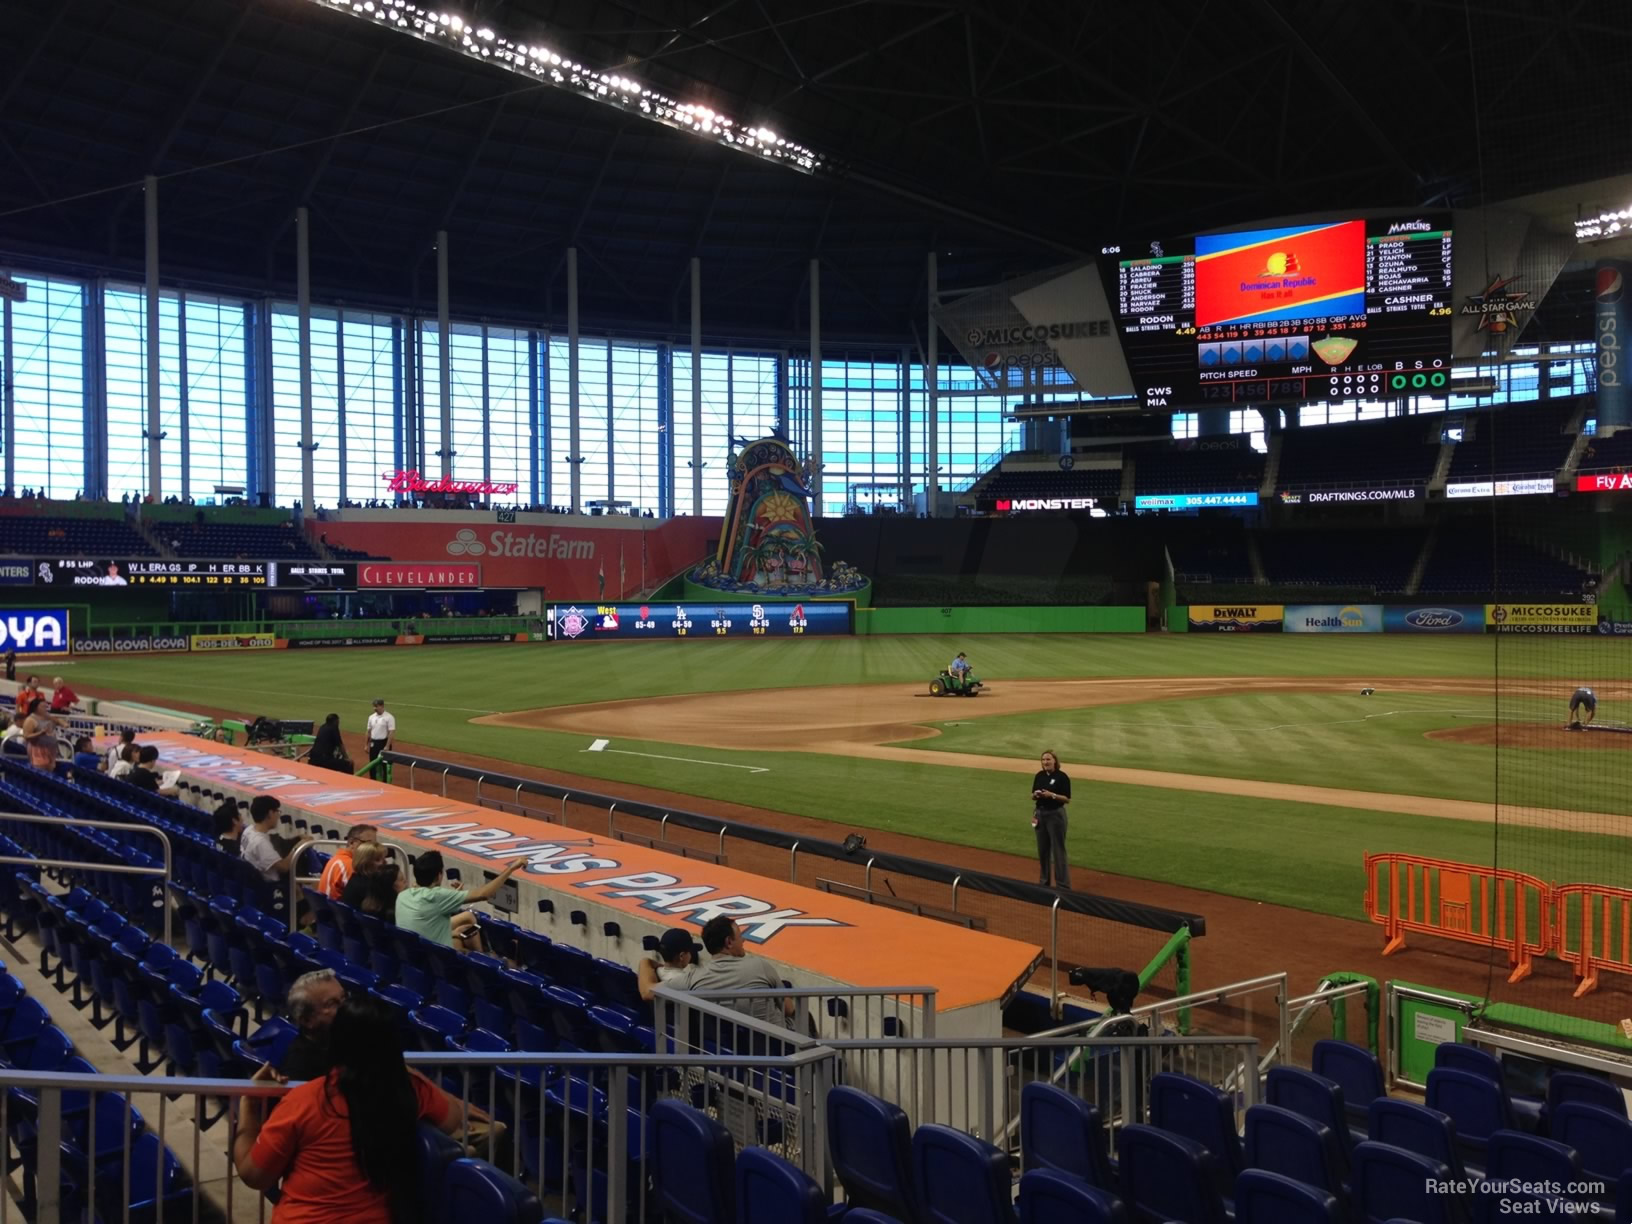 LoanDepot Park, section 18, row 12, home of Miami Marlins , page 1